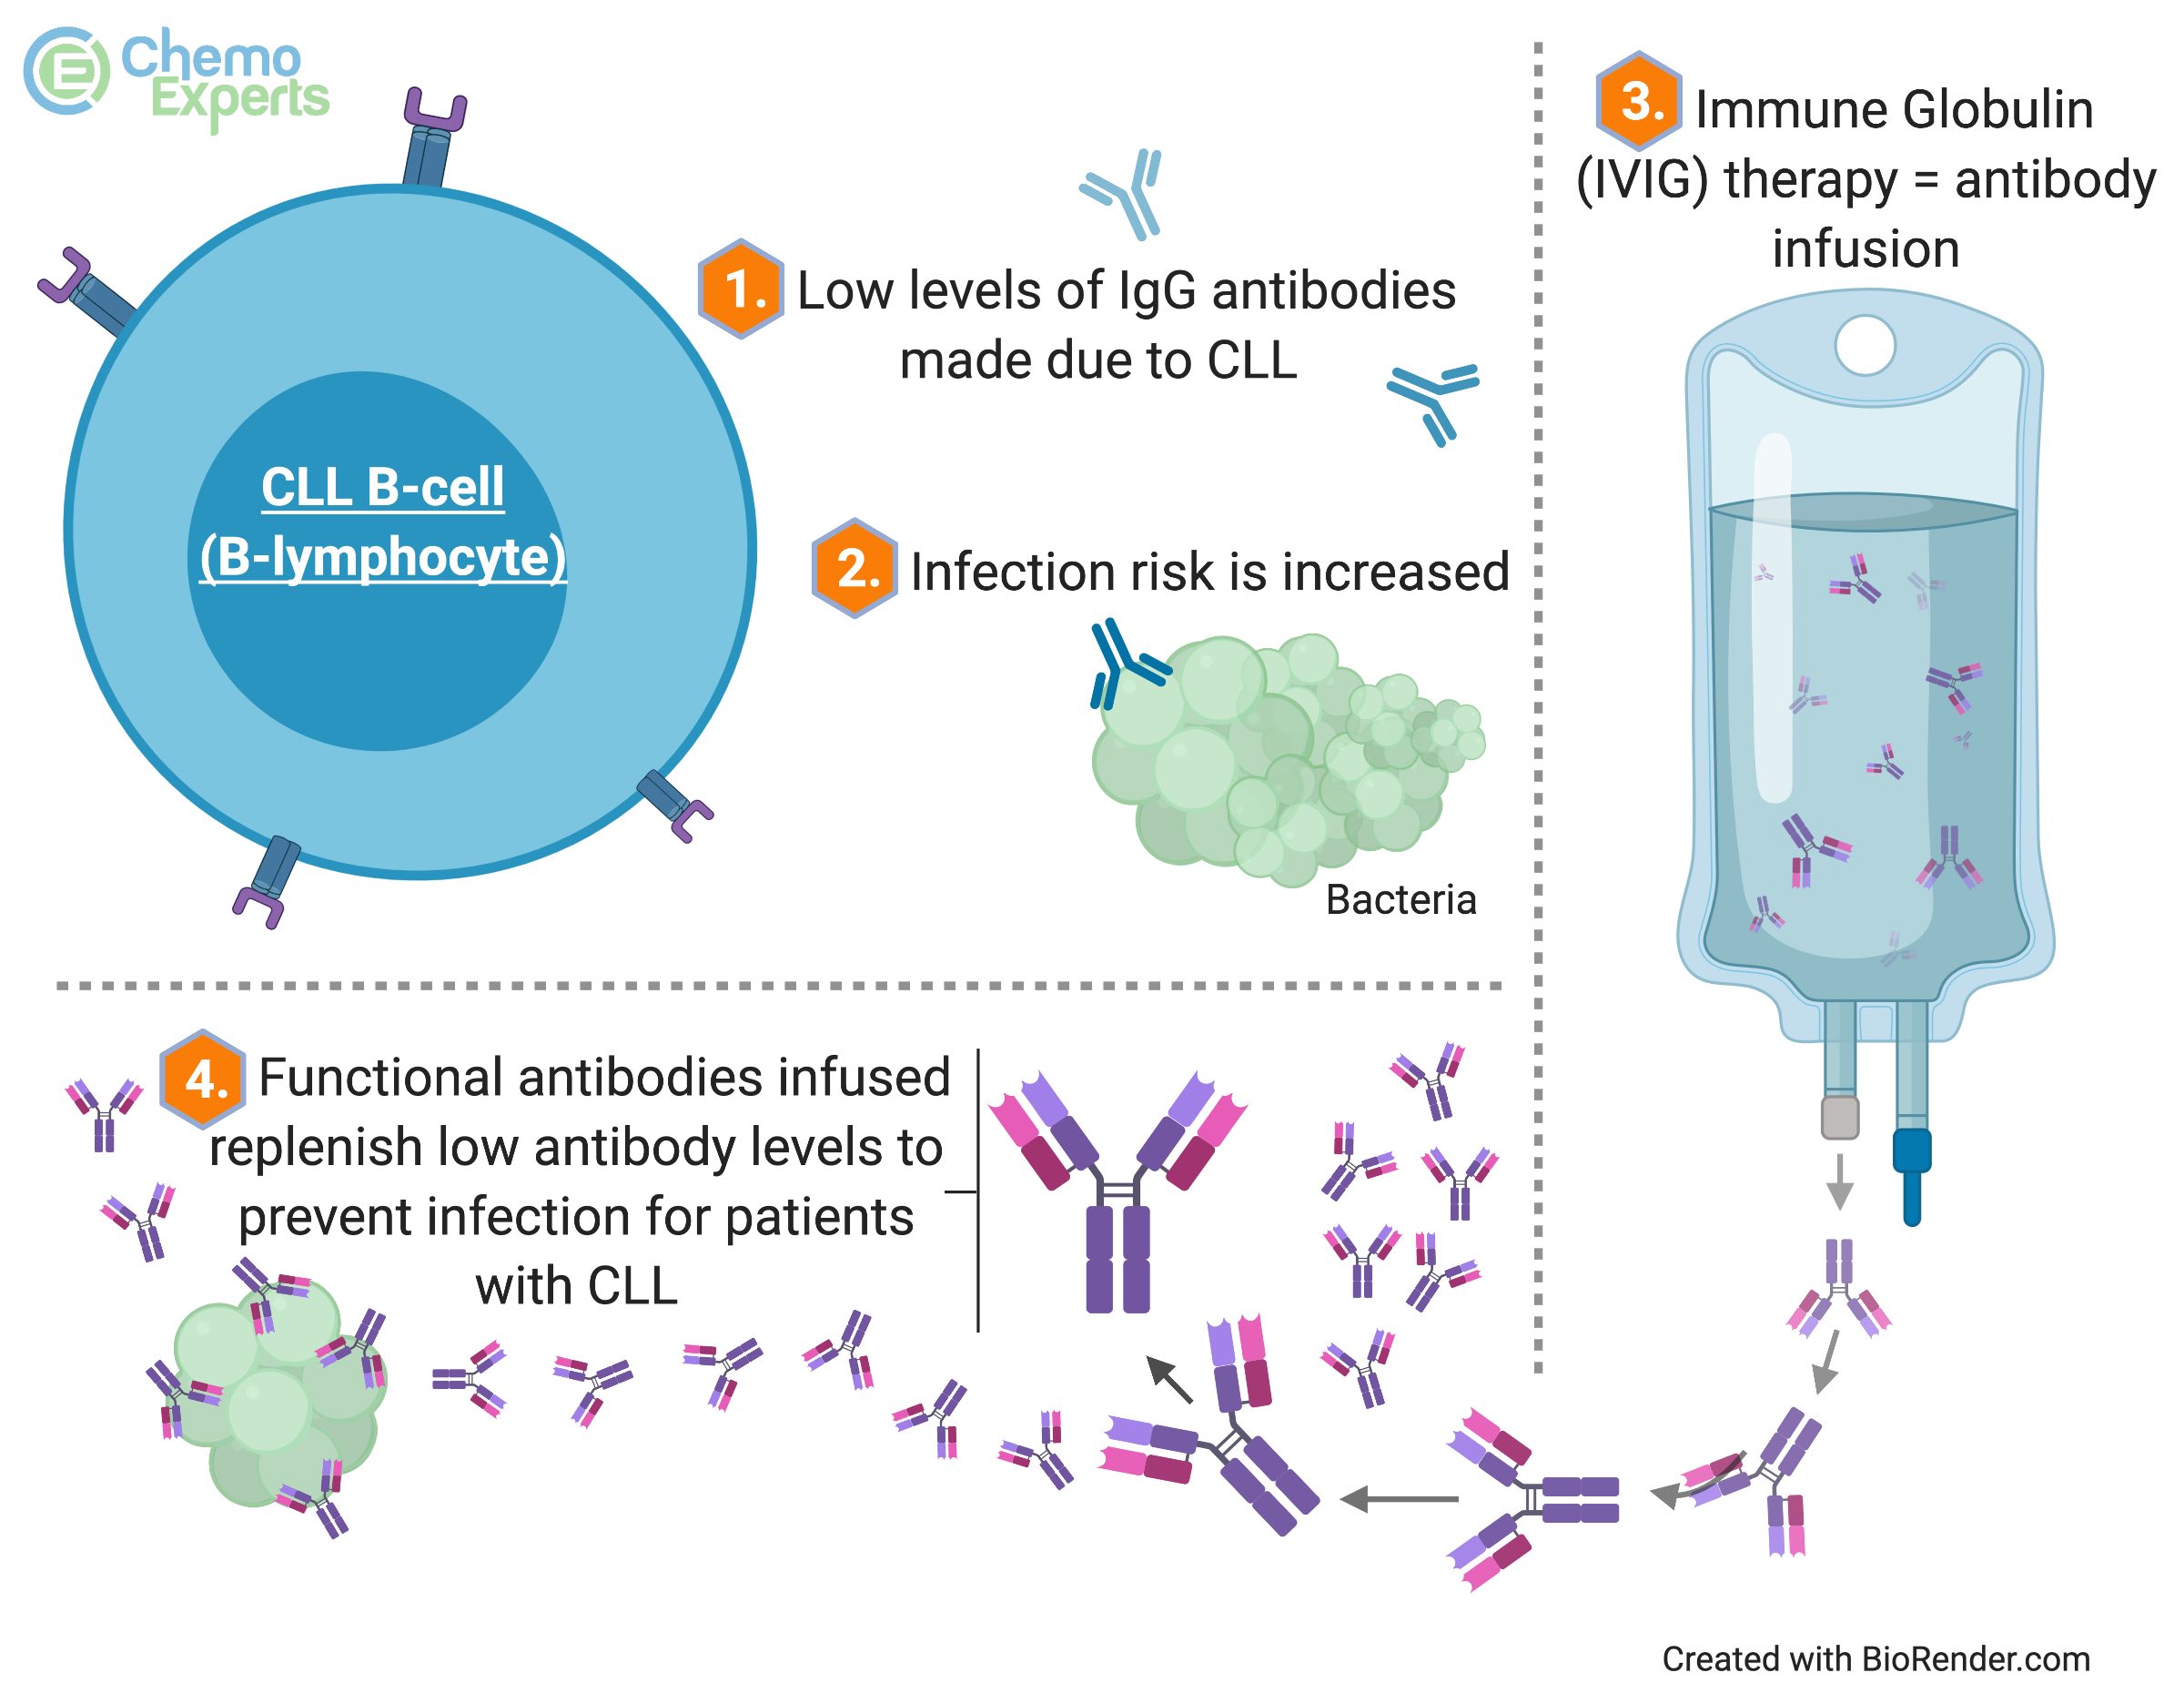 Image showing how IVIG may prevent severe infections in patients with CLL and hypogammaglobulinemia